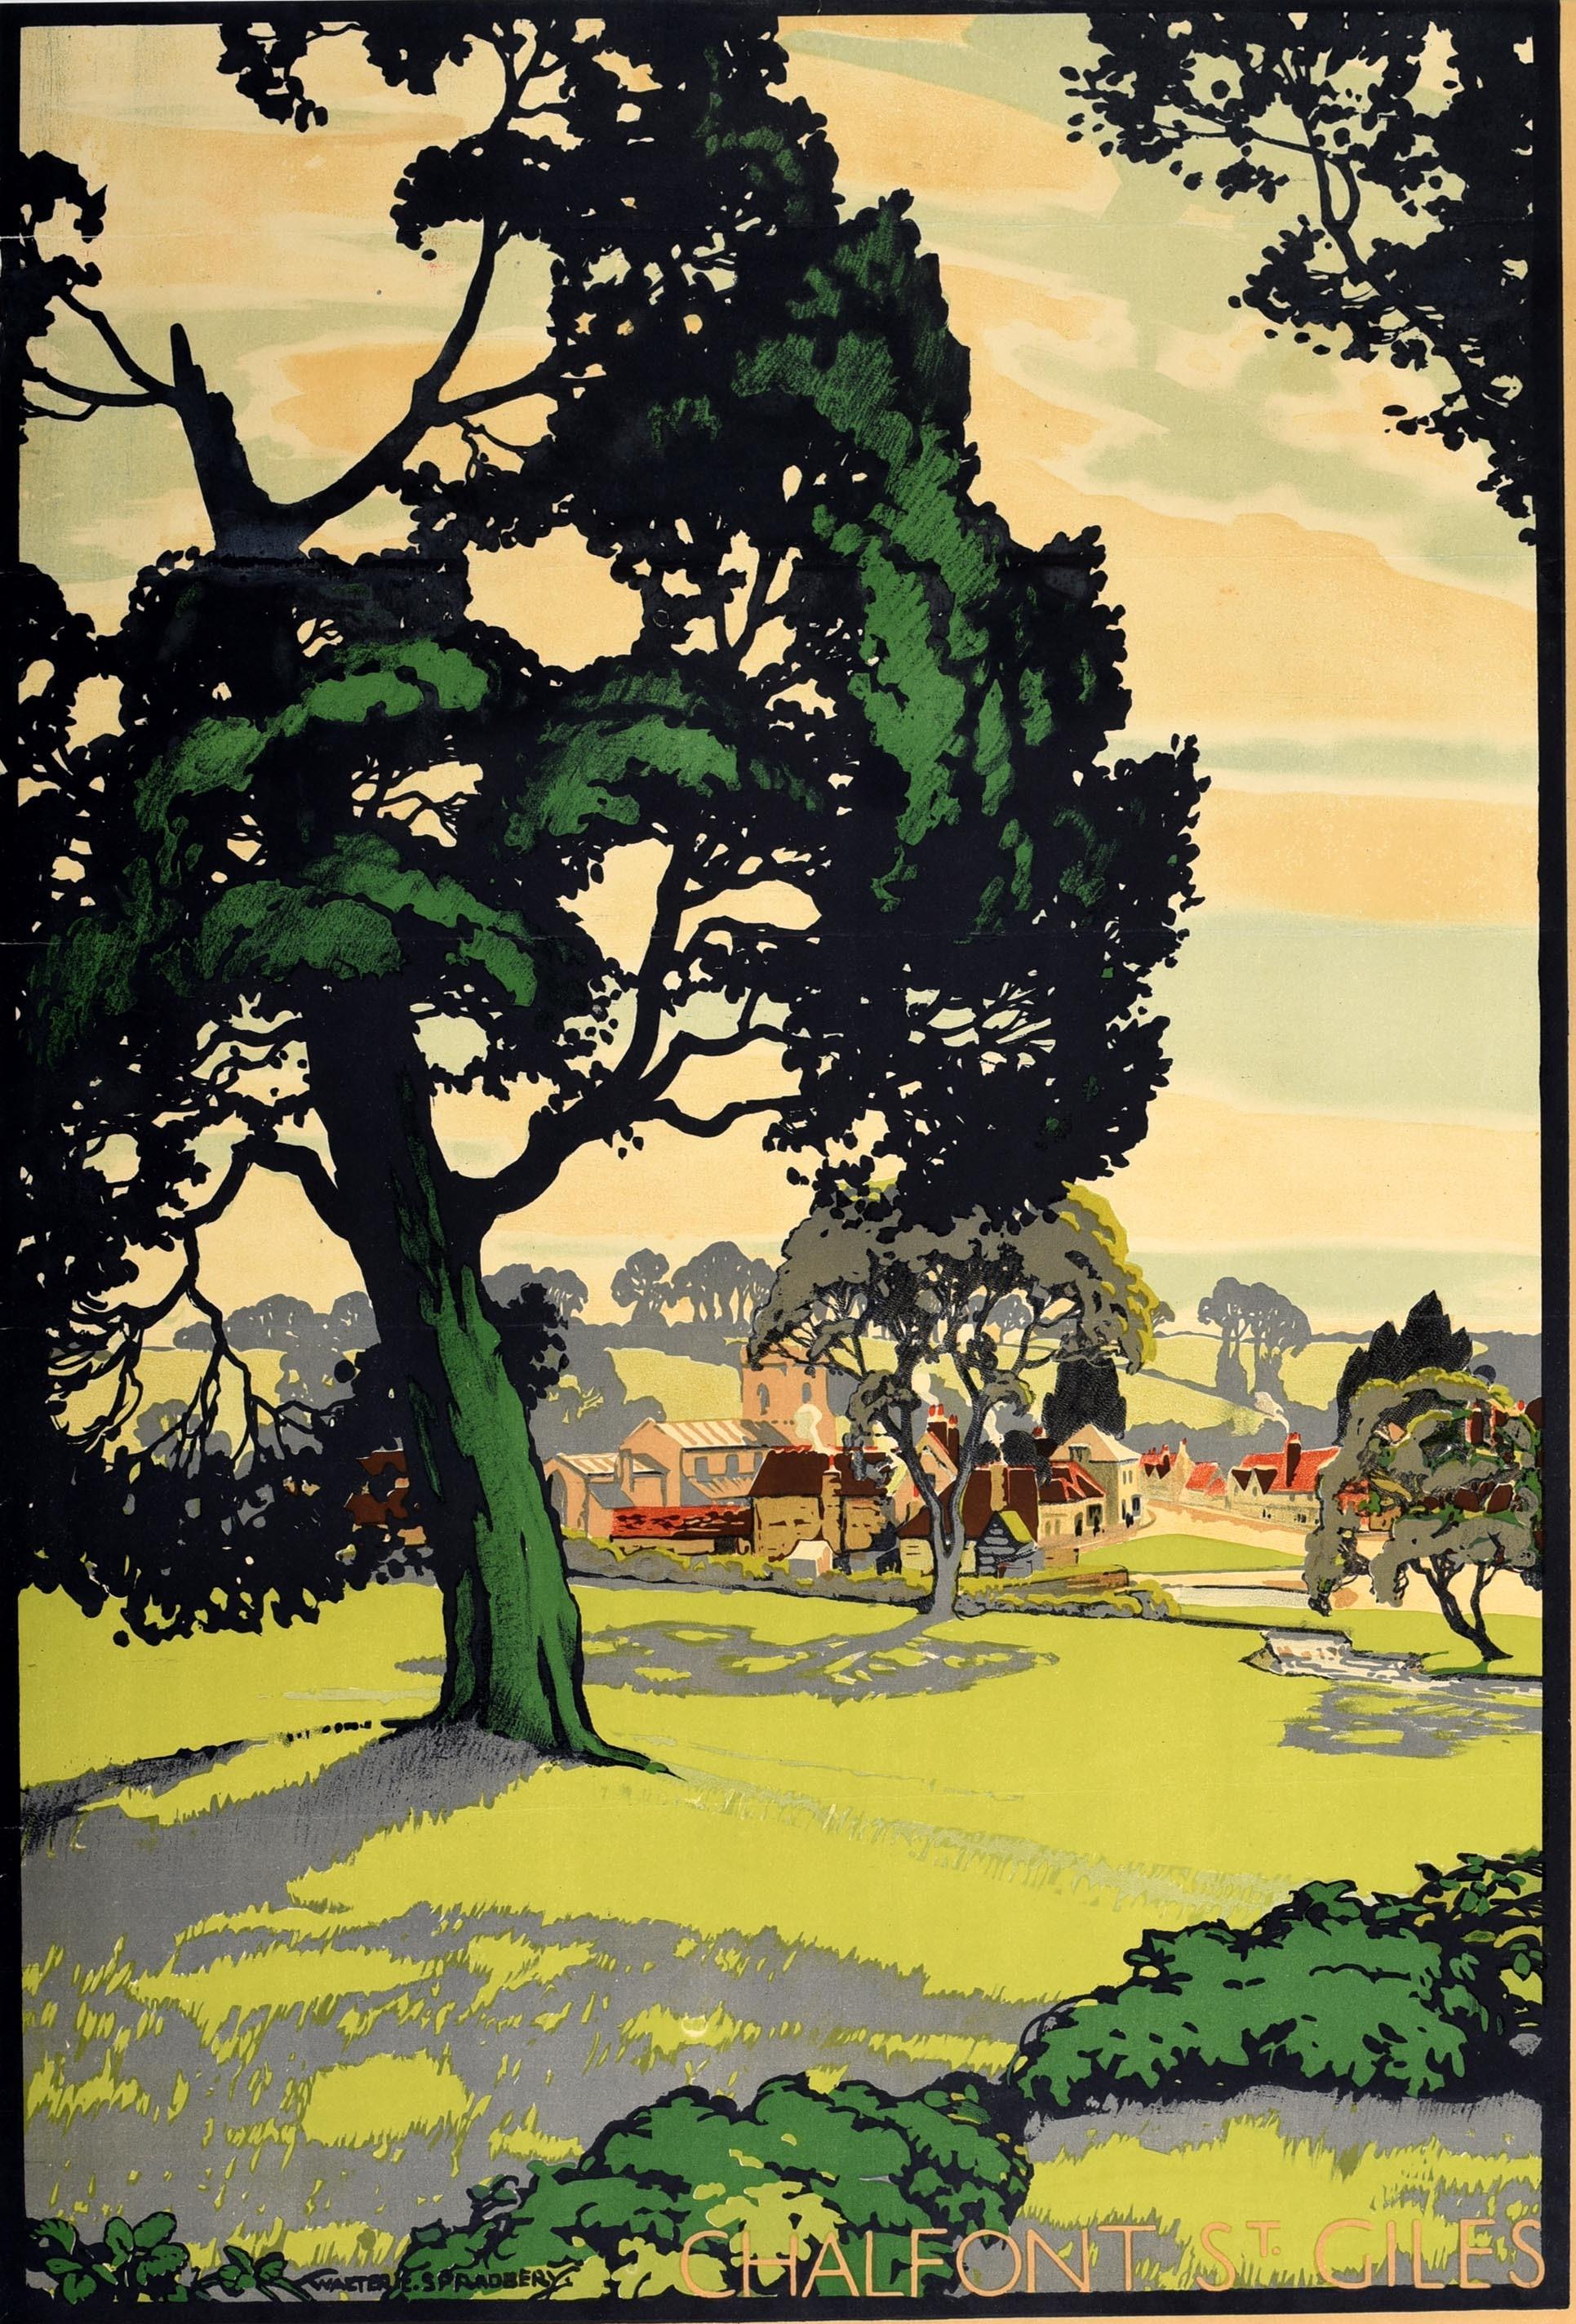 Original Vintage London Transport Poster At London's Service Chalfont St Giles - Print by Walter E. Spradbery